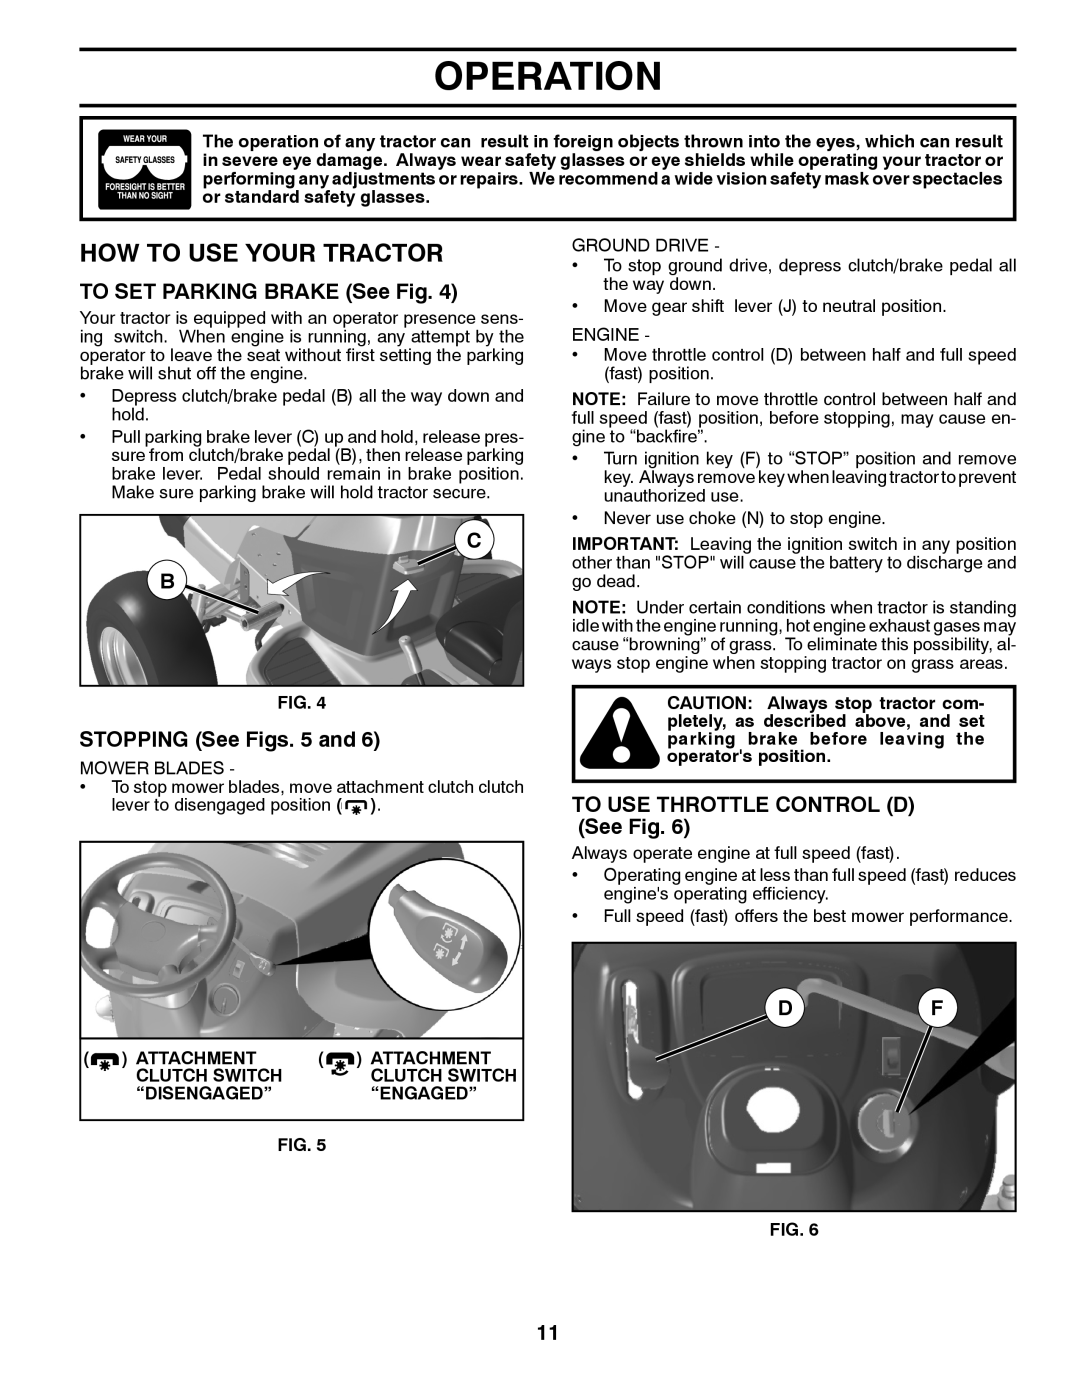 Husqvarna TS300-E3 manual How To Use Your Tractor, TO SET PARKING BRAKE See Fig, STOPPING See Figs. 5 and, Operation 